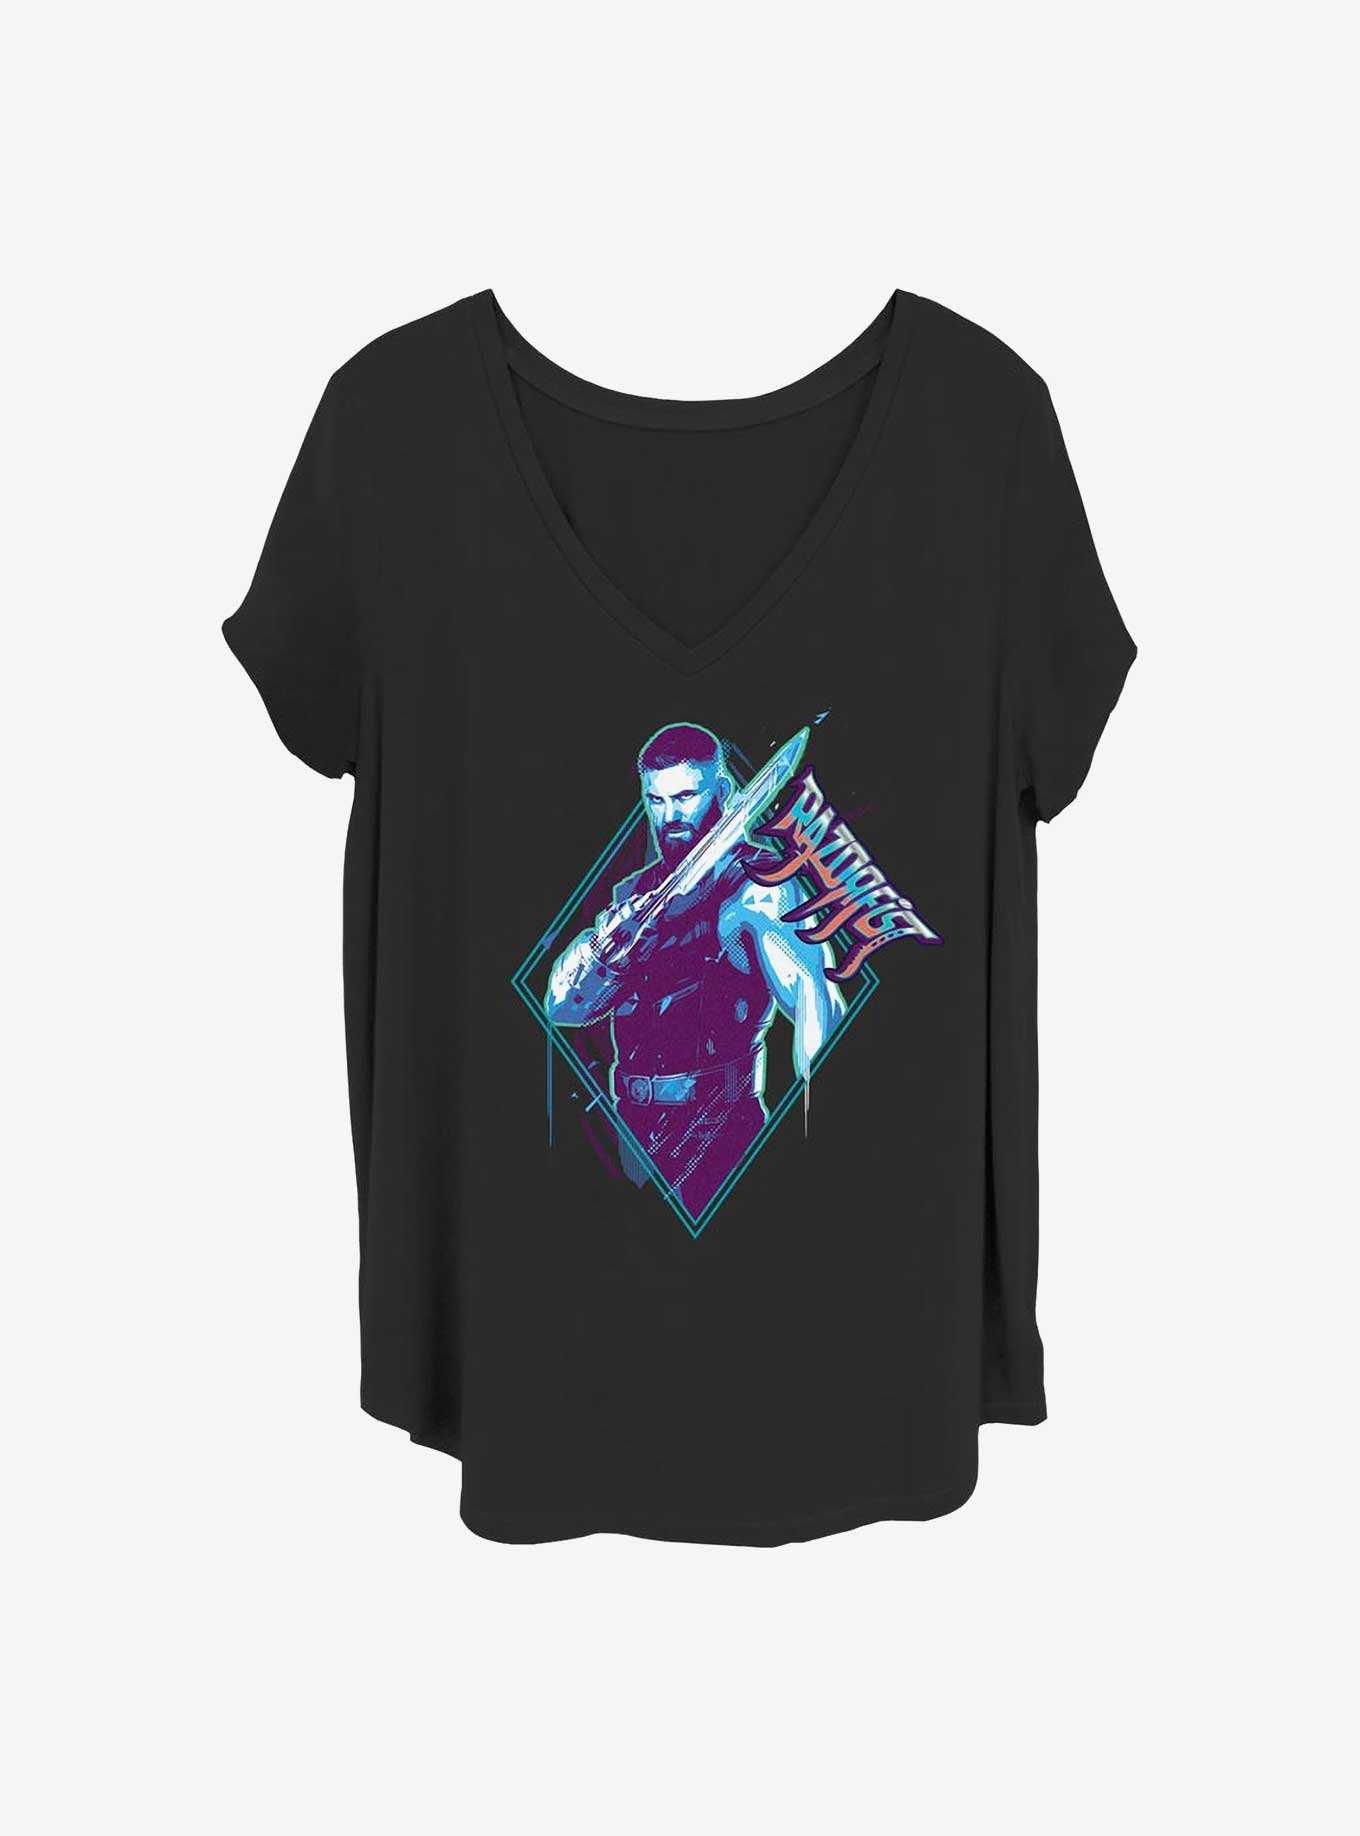 Marvel Shang-Chi and the Legend of the Ten Rings Razorfist Badge Girls T-Shirt Plus Size, , hi-res